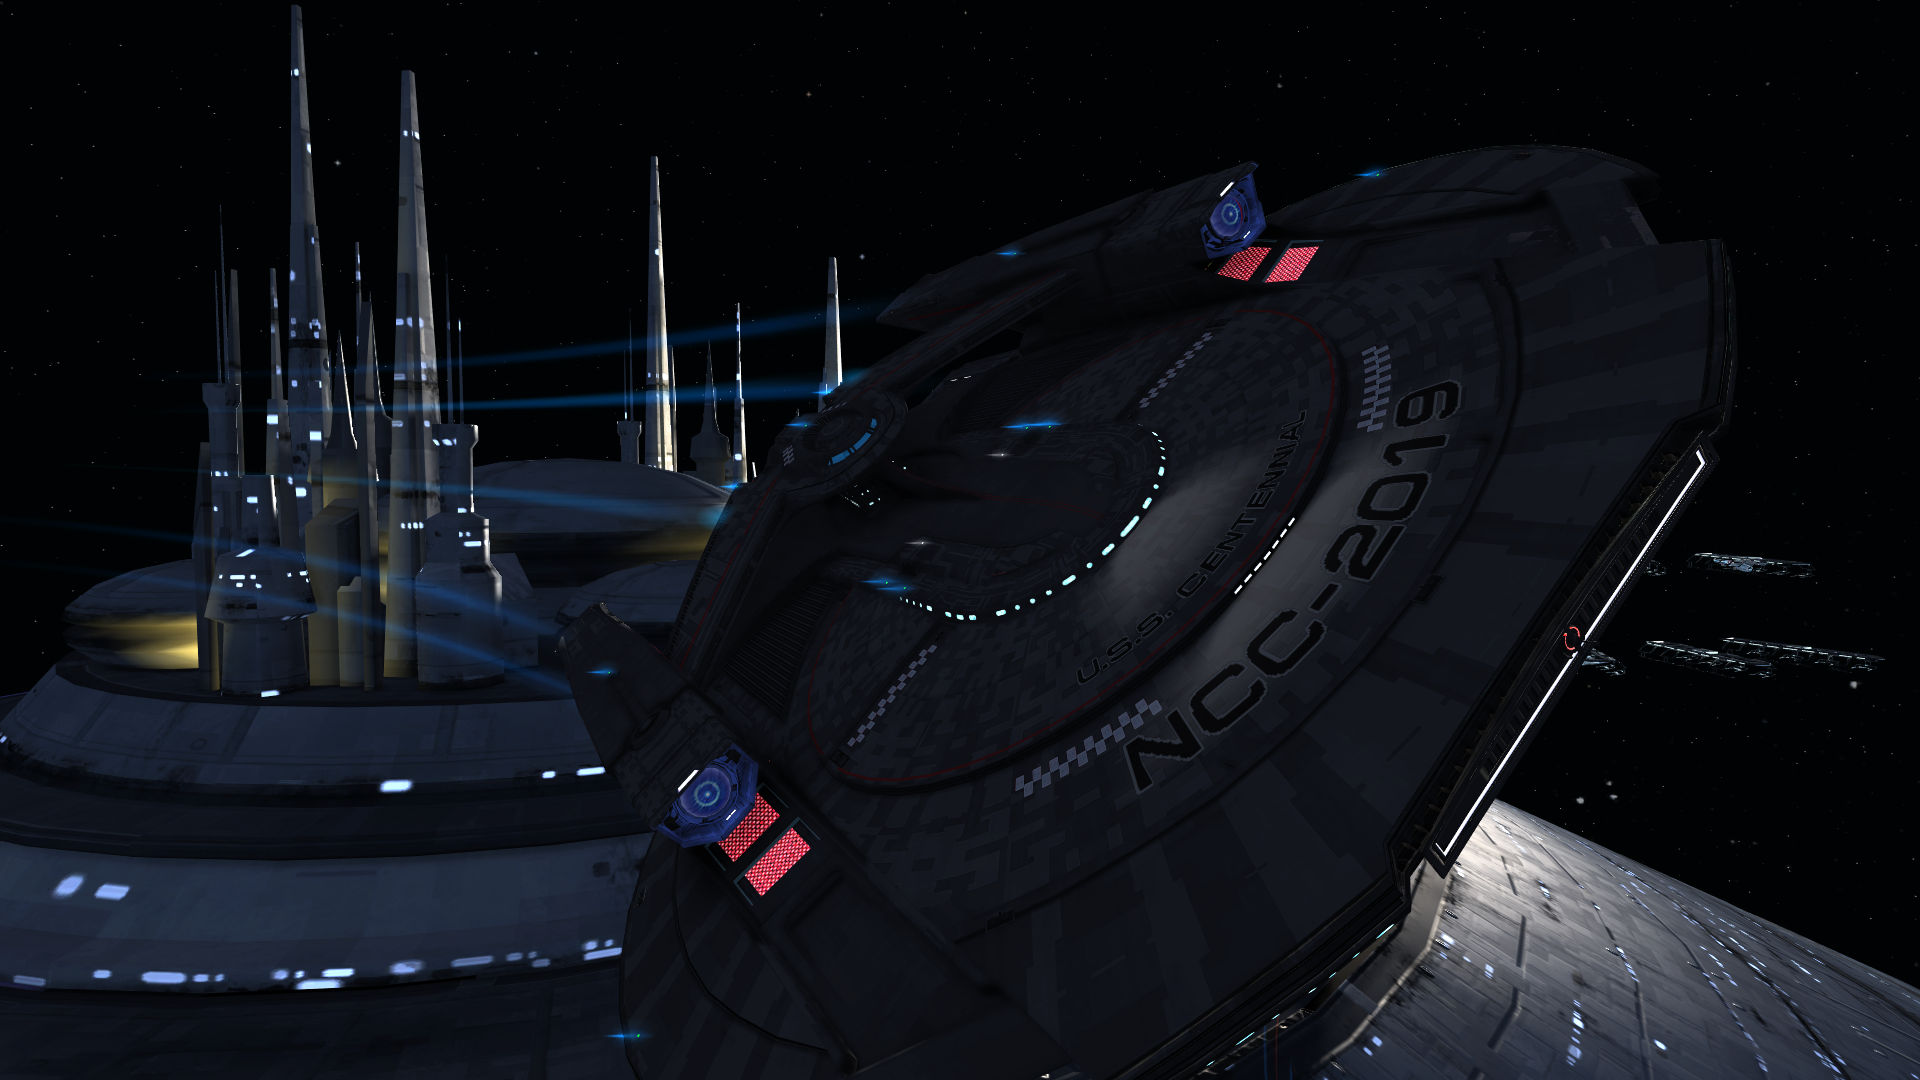 U.S.S. Centennial 
Named after my college